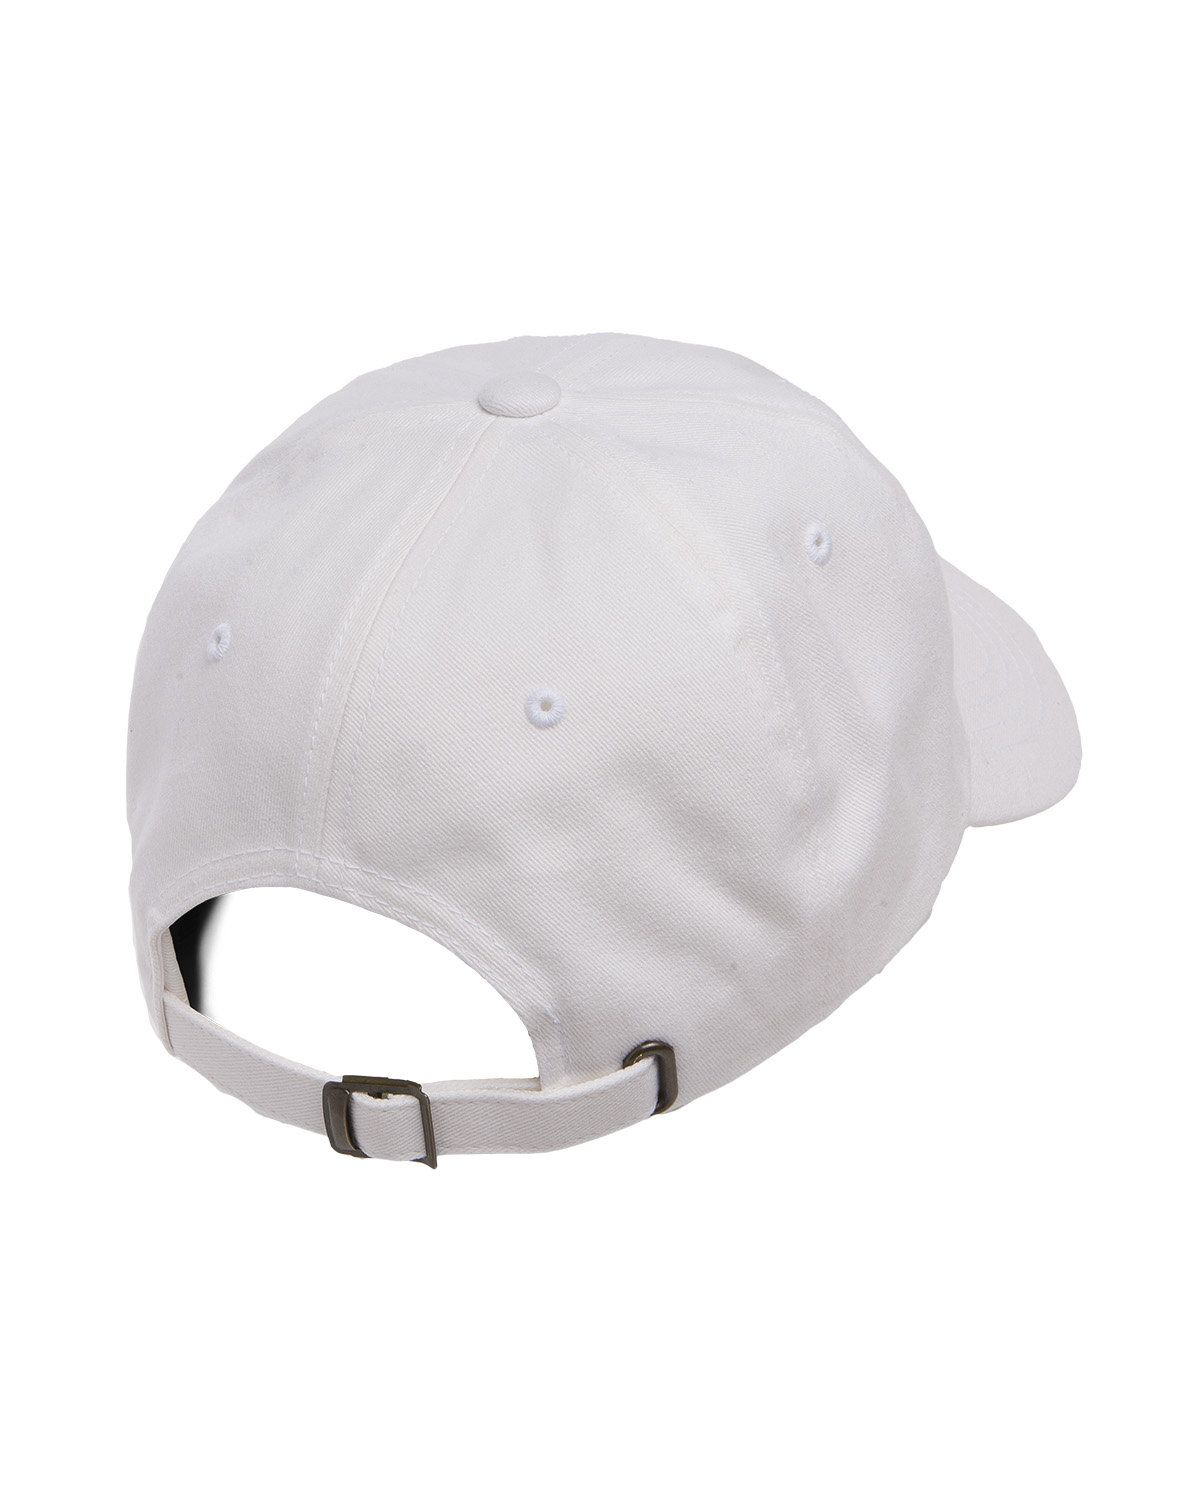 'Yupoong 6245PT Adult Peached Cotton Twill Dad Cap'